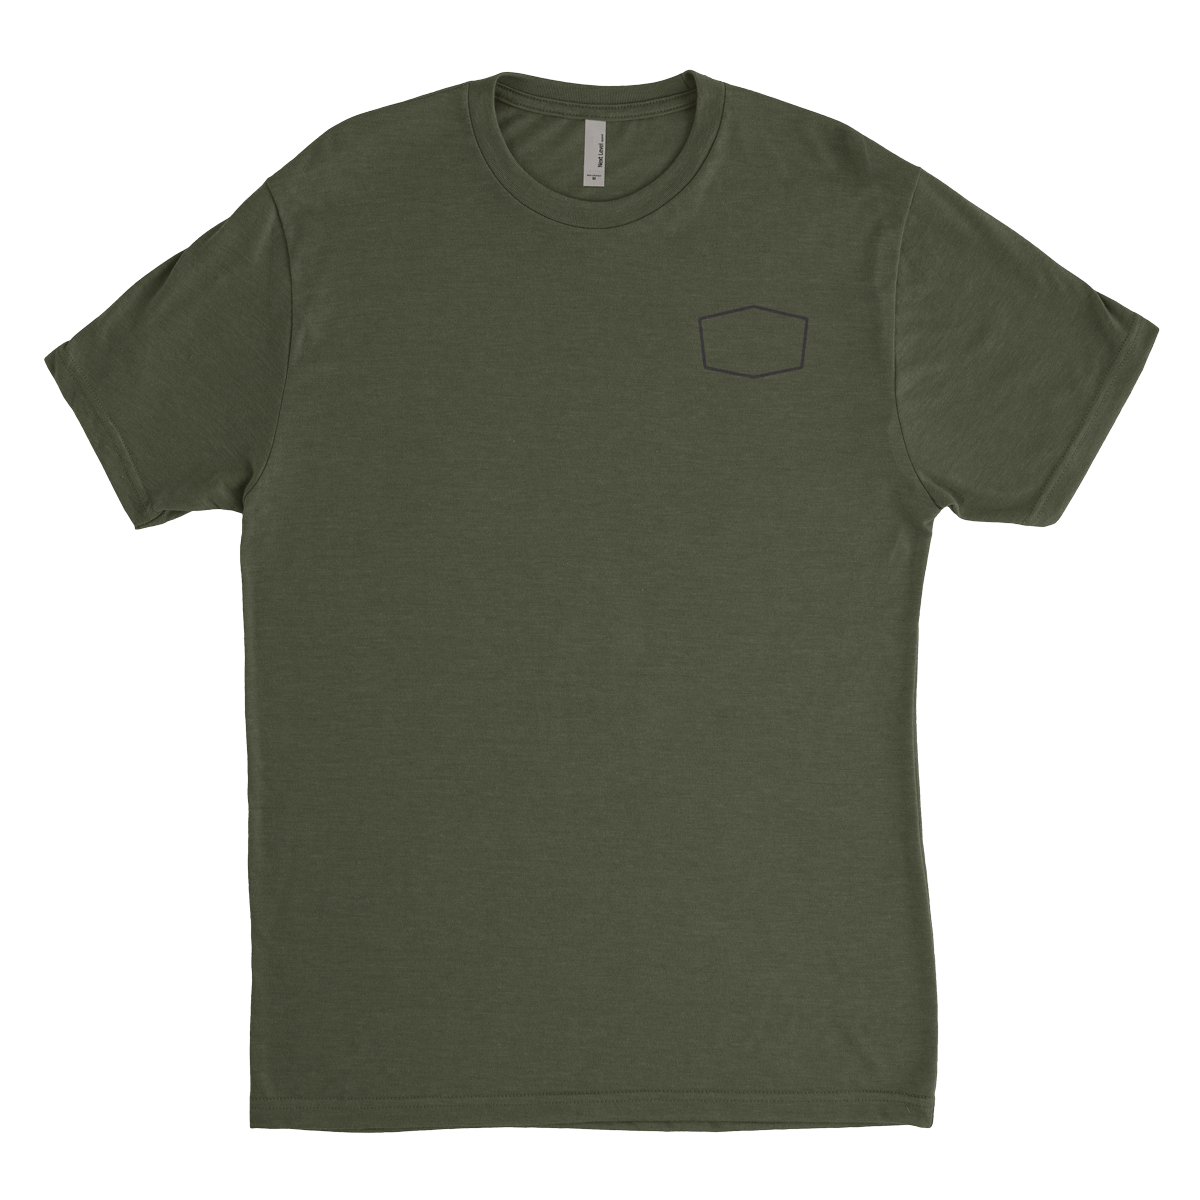 Mens Heathered Green Crew T-Shirt with small BUBS Naturals logo on the front